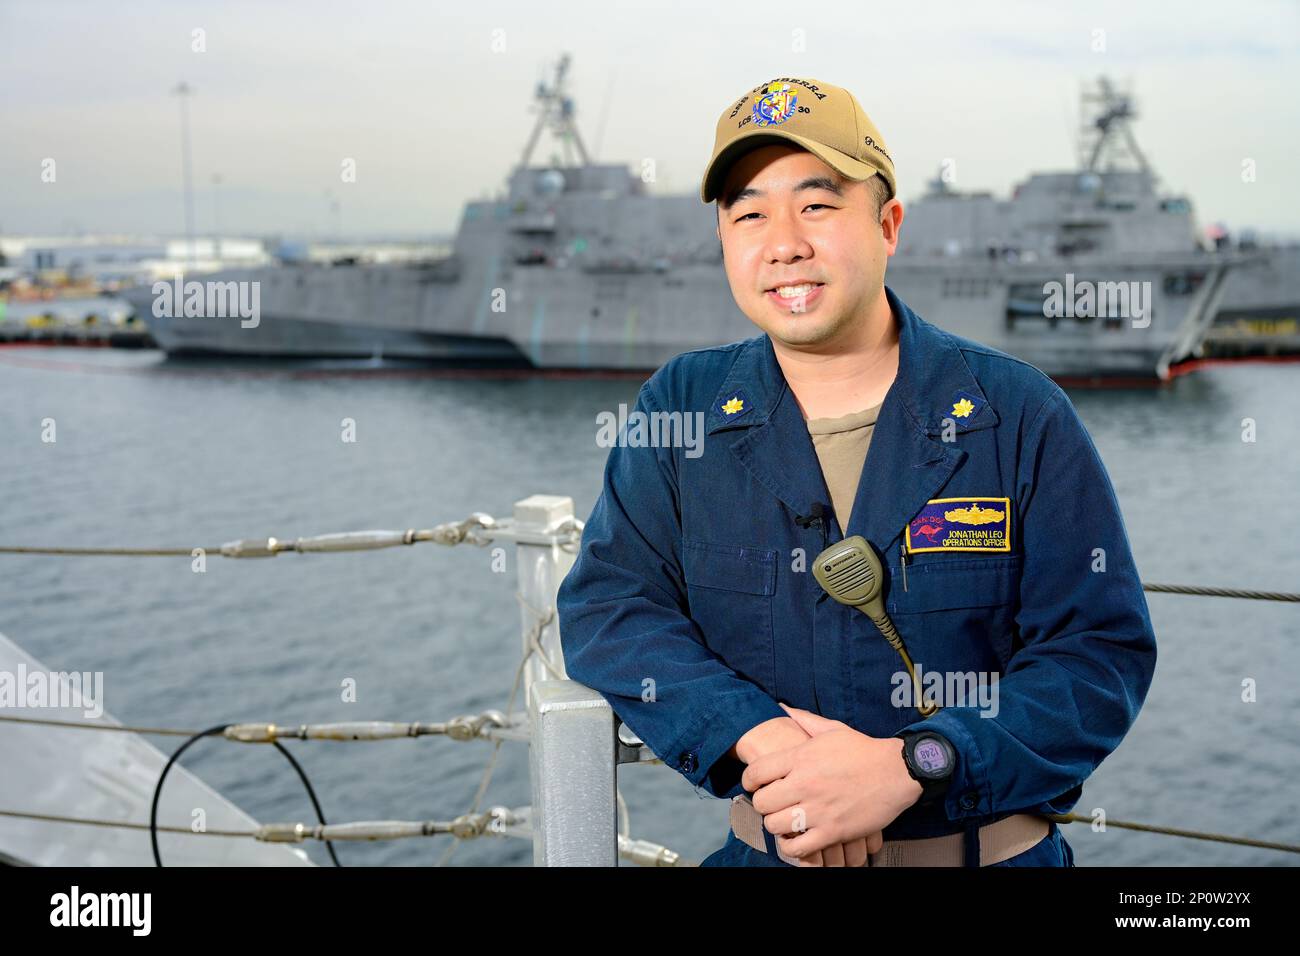 Lt. Cmdr. Jonathan Leo, operations officer of the Independence-class litorral combat ship USS Canberra (LCS 30), poses with the Independence-class LCS USS Kansas City (LCS 22) behind him in San Diego, Jan. 13, 2023, as Canberra prepares to participate in its Combat System Ship Qualification Trials. Leo also participated in the CSSQT of Kansas City during its pre-deployment qualification trials.     The CSSQT qualification process is a NAVSEA pre-deployment requirement to verify the crew’s ability to operate and maintain their combat systems in a safe and effective manner. It is considered a ma Stock Photo